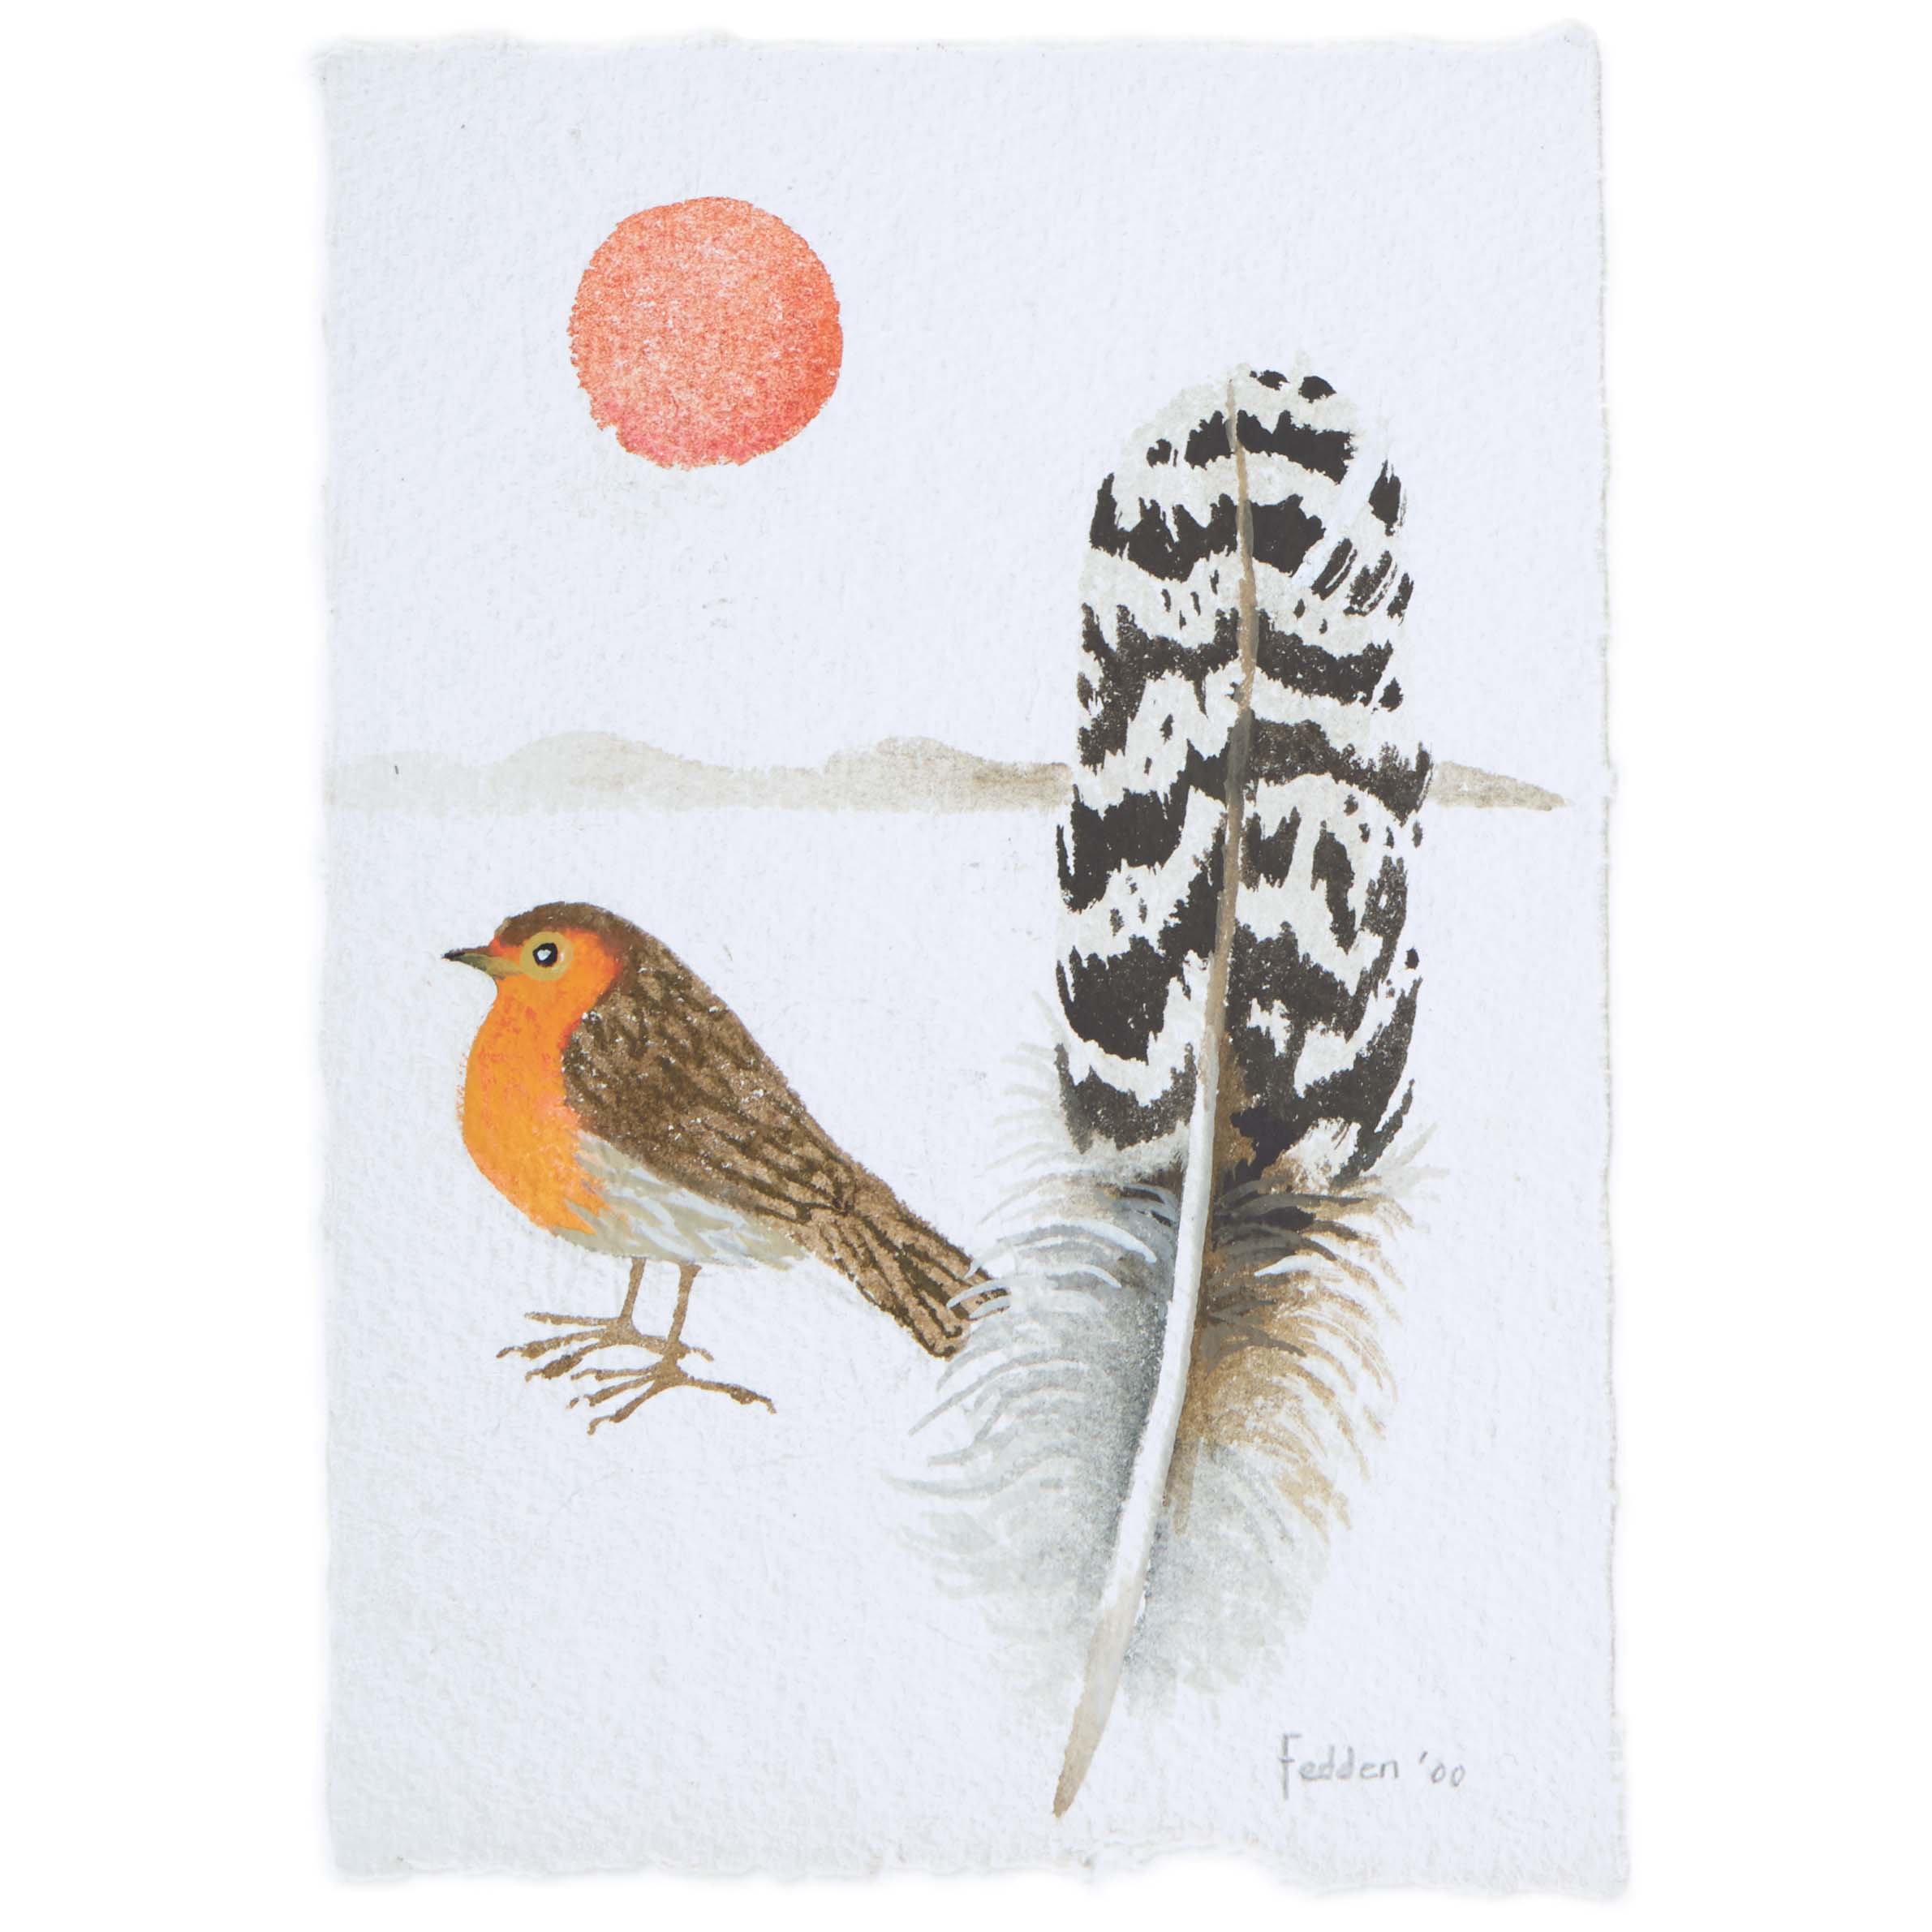 MARY FEDDEN. ROBIN WITH FEATHER. 2000. SOLD